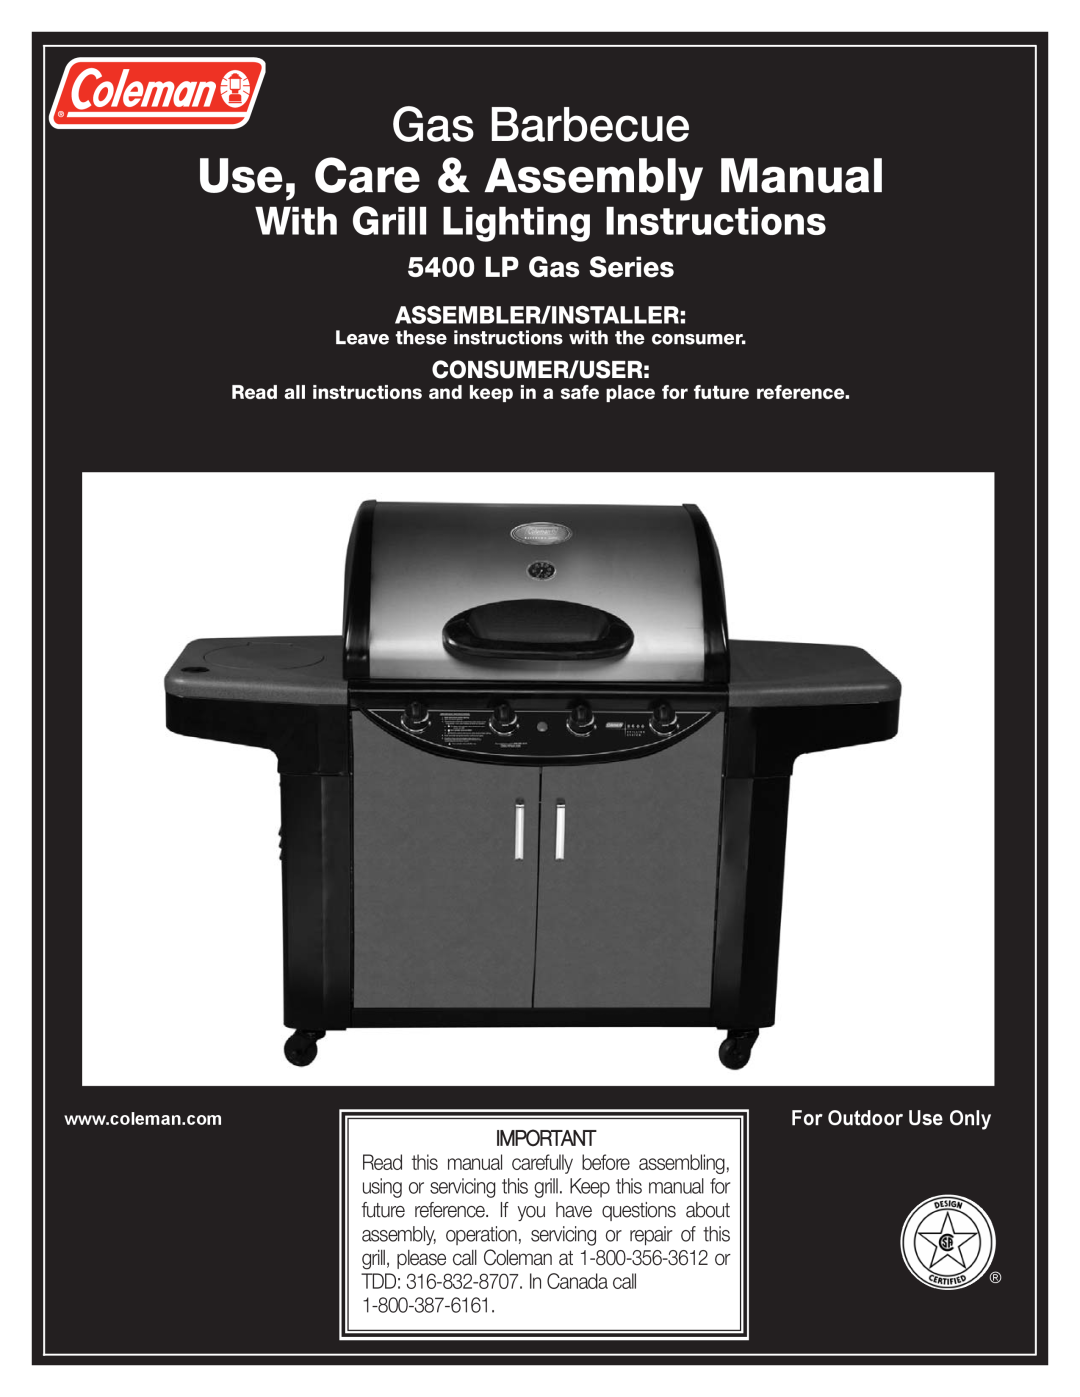 Coleman 5400 LP manual Assembler/Installer, Consumer/User, For Outdoor Use Only, Gas Barbecue, Use, Care & Assembly Manual 